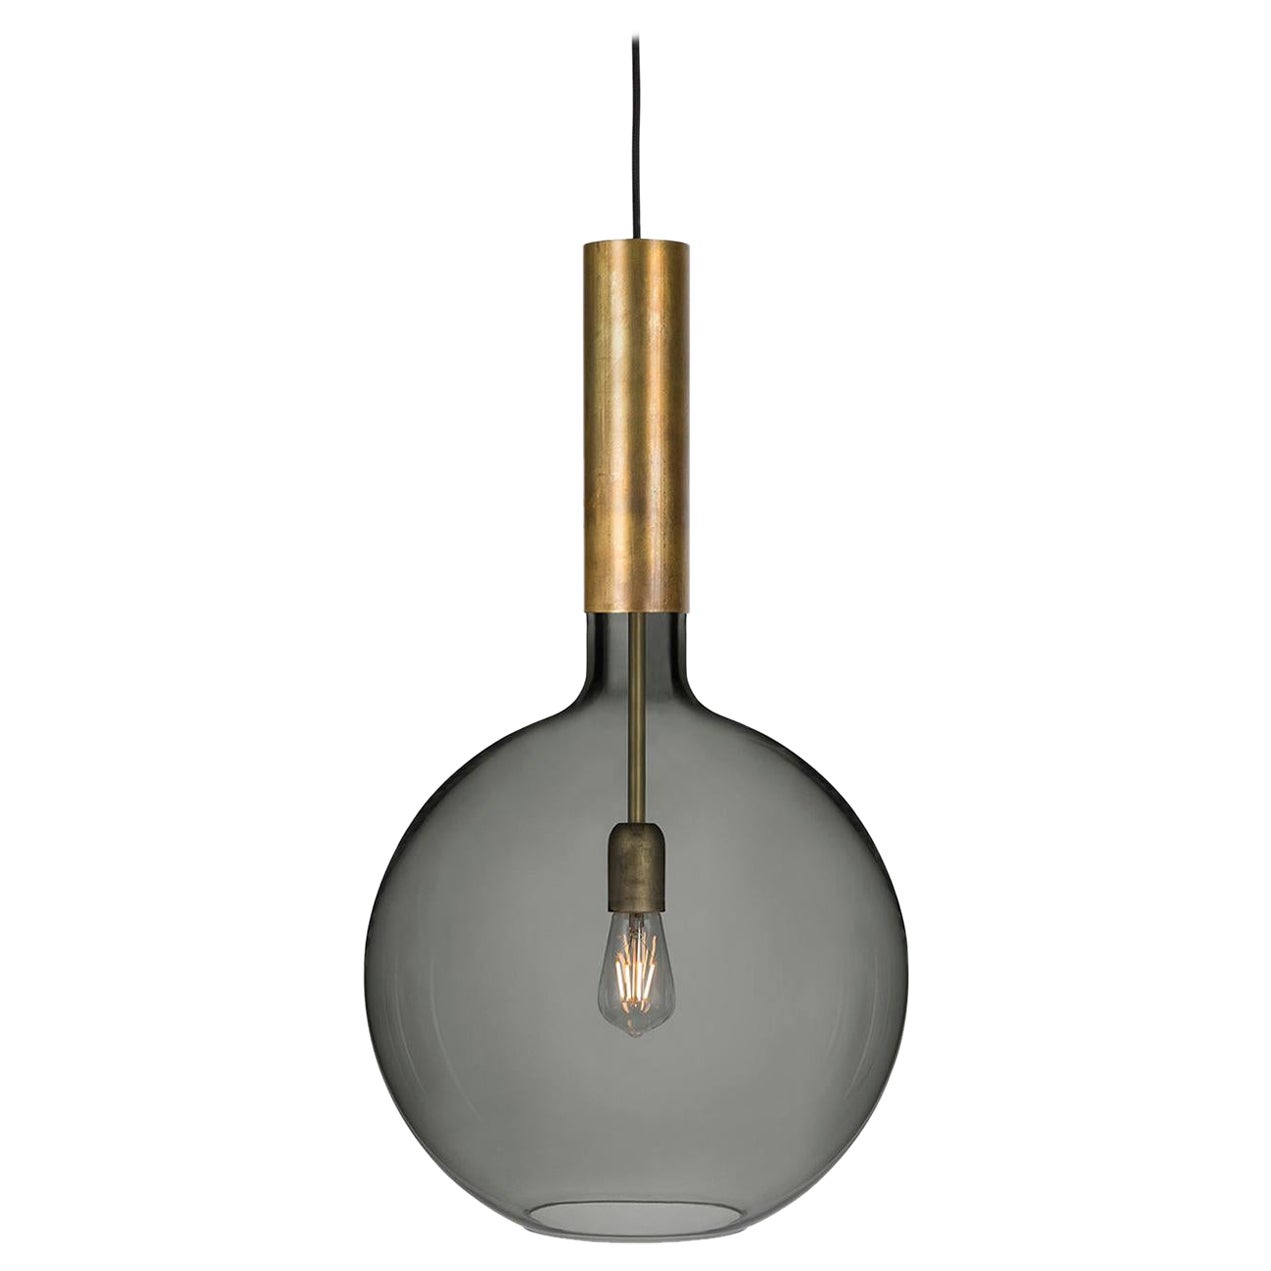 Sabina Grubbeson Rosdala Large Brass Smoked Glass Ceiling Lamp by Konsthantverk For Sale